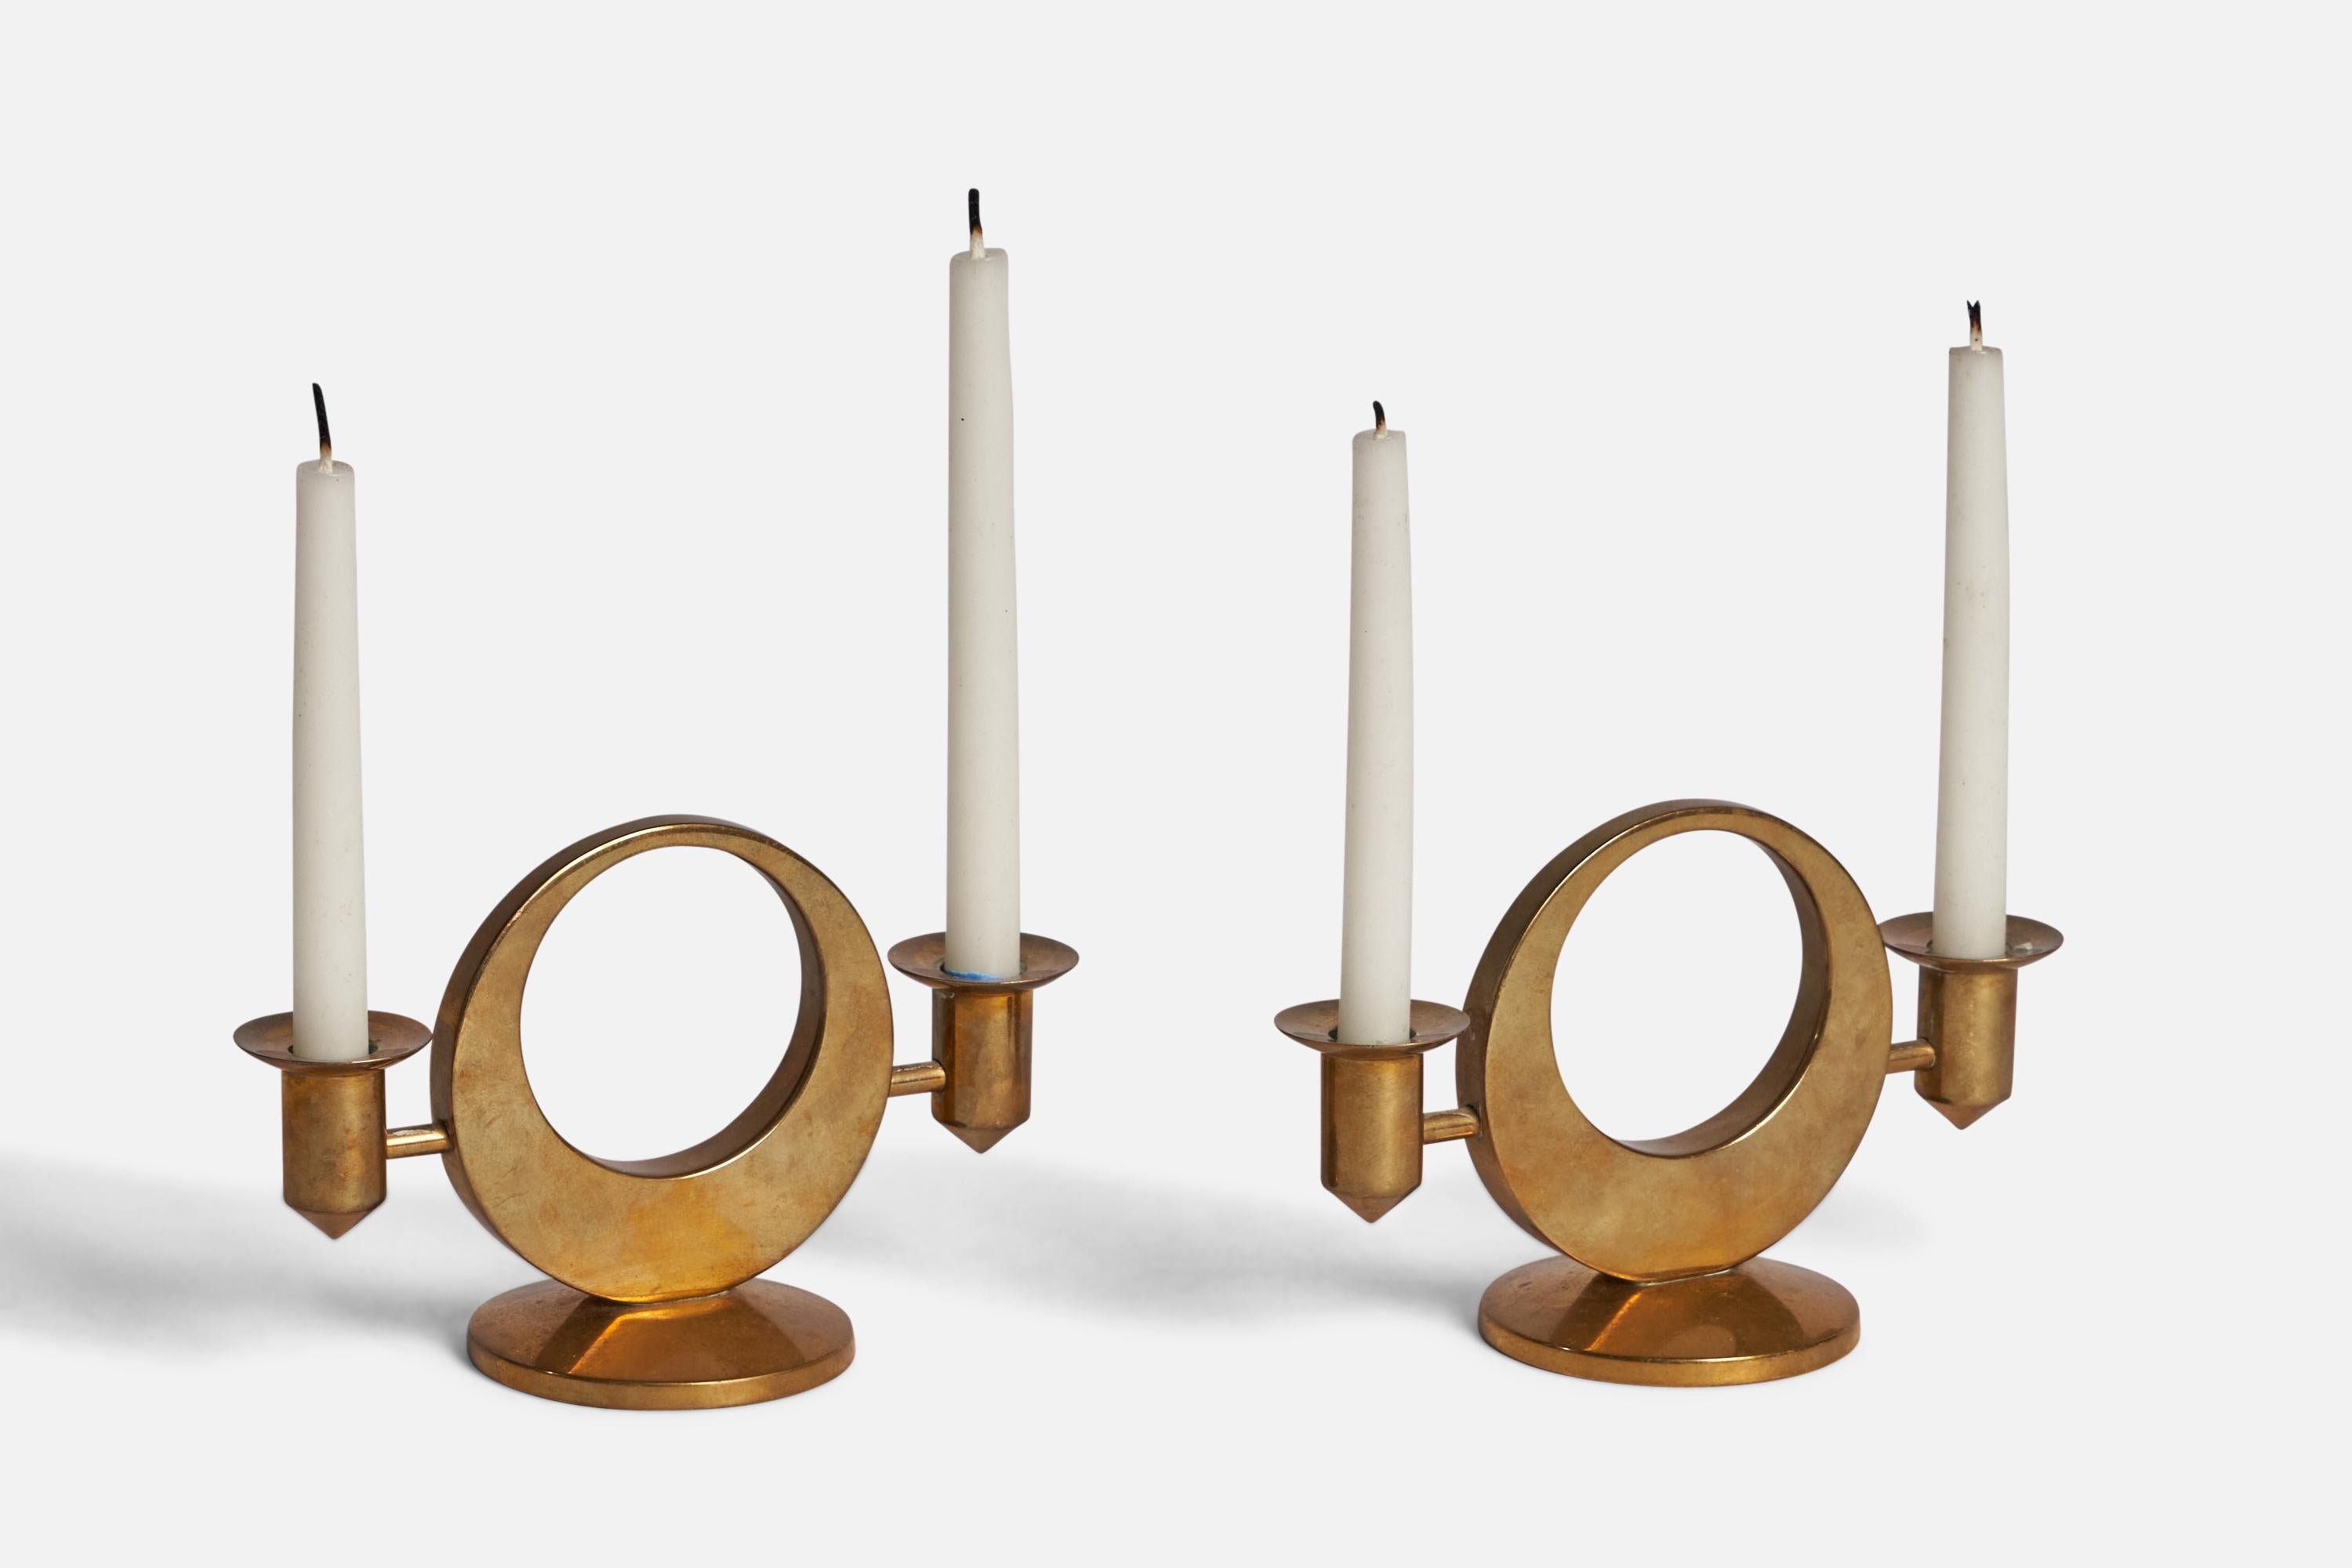 A pair of candle holders or candlesticks designed and produced by Arthur PE Kolbäck, Sweden, c. 1940s.

“Arthur Pe KOLBACK” engraving on bottom
Fits 0.5” diameter candles